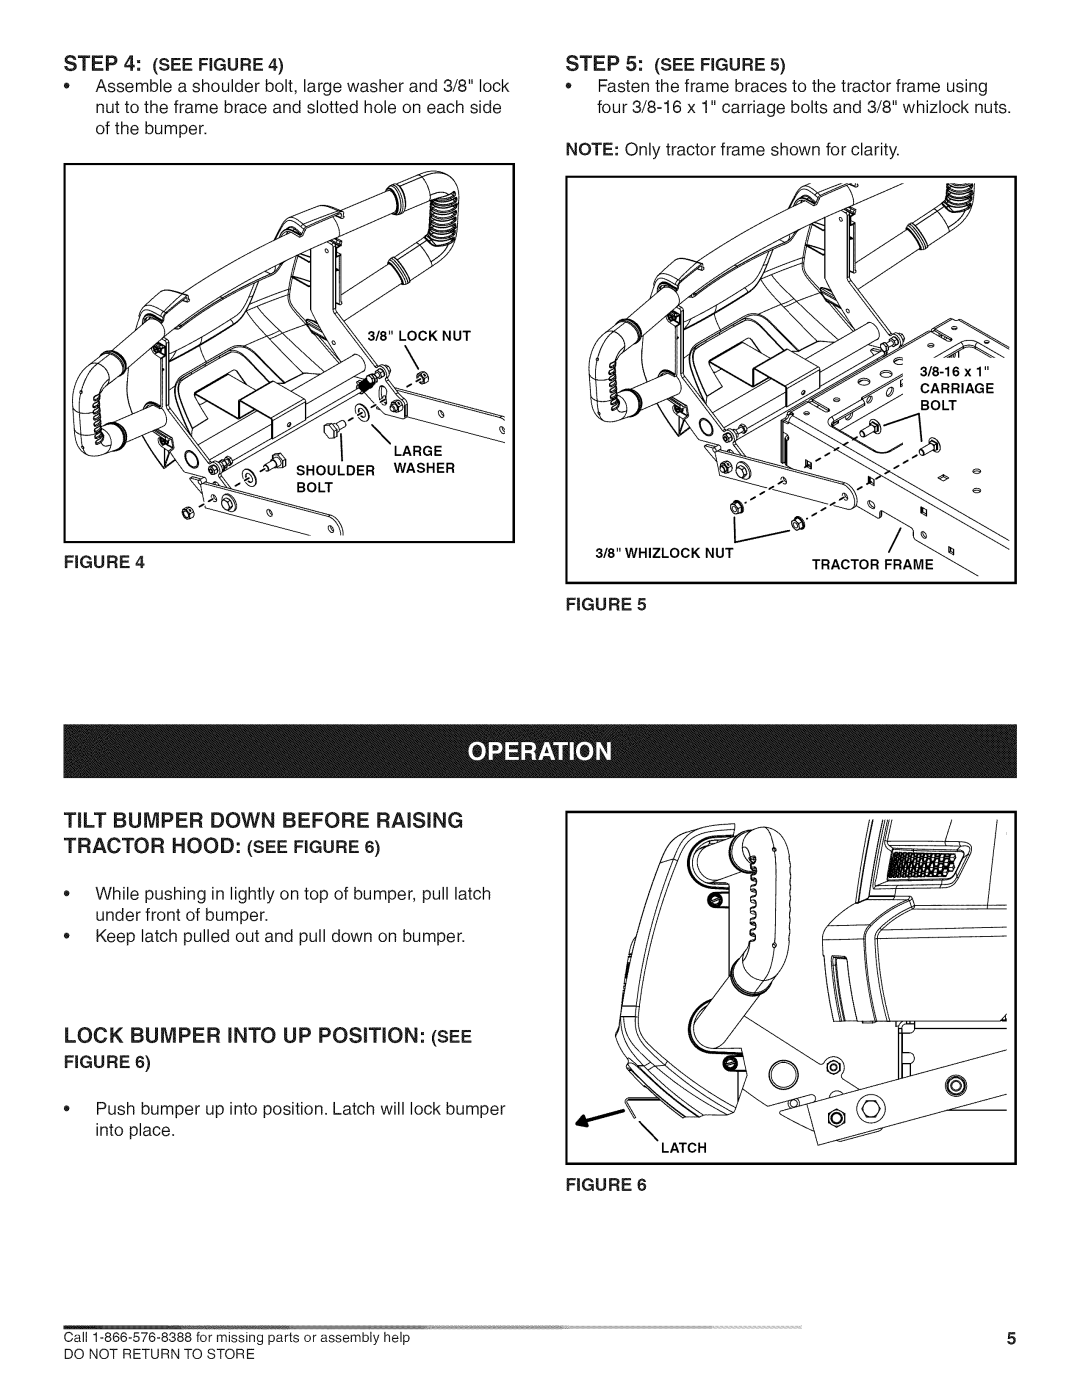 Craftsman 486.421264 manual TiLT BUMPER DOWN BEFORE RAiSiNG, Tractor Hood See Figure, LOCK BUMPER iNTO UP POSiTiON SEE 